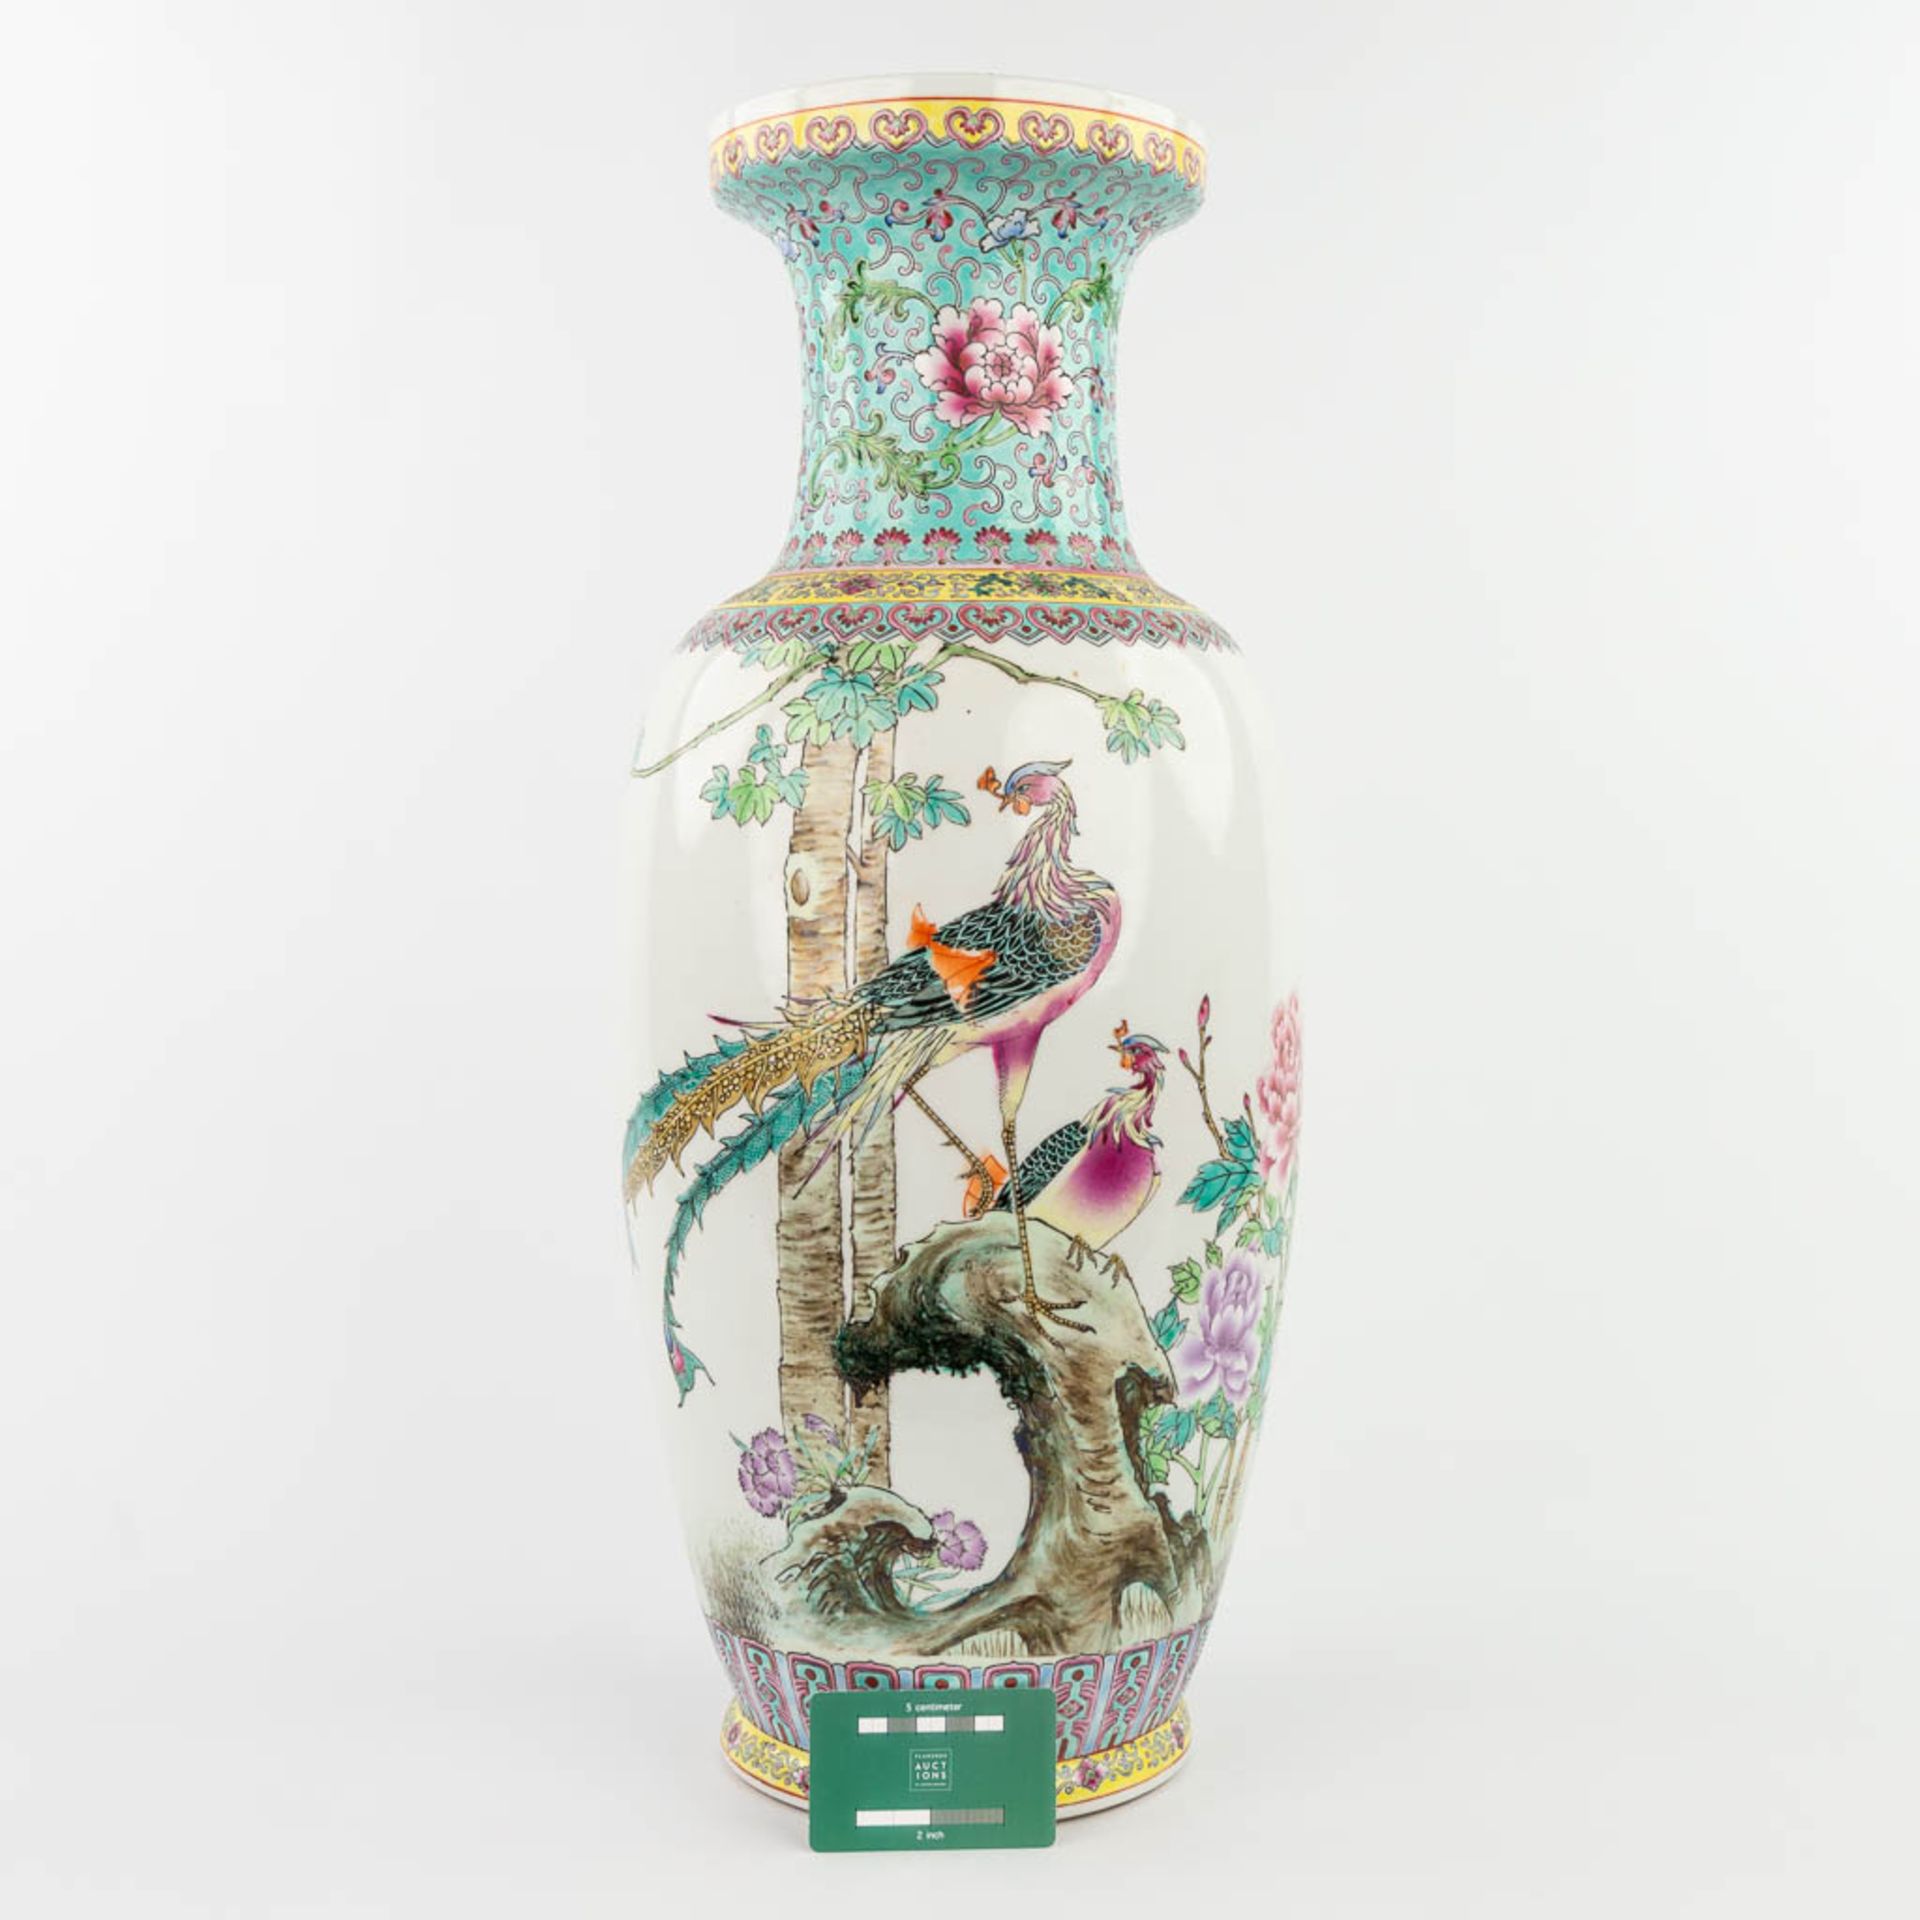 A Chinese vase made of porcelain and decorated with peacocks. 20th C. (60,5 x 23,5 cm) - Image 5 of 12